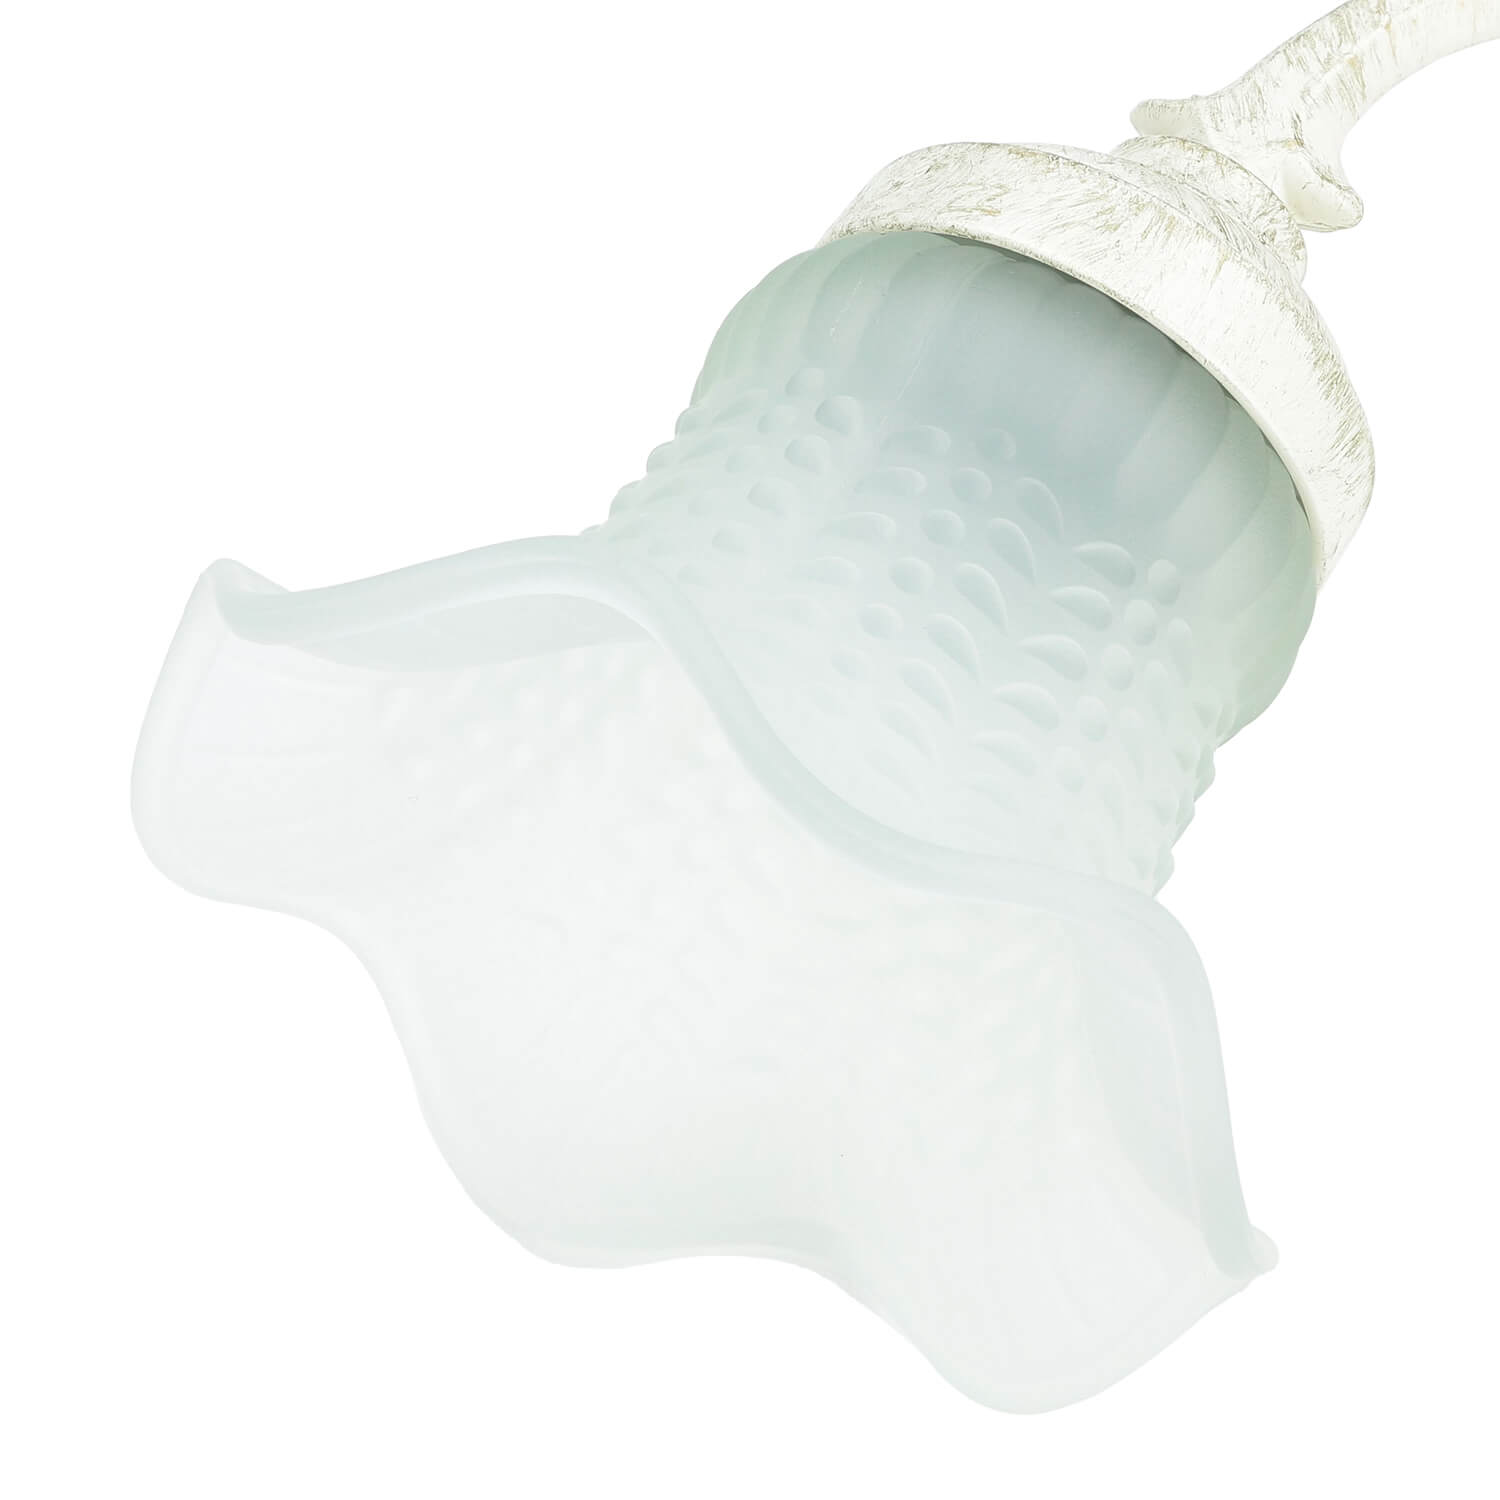 Wandlampe Shabby Chic Echt-Messing Glas floral